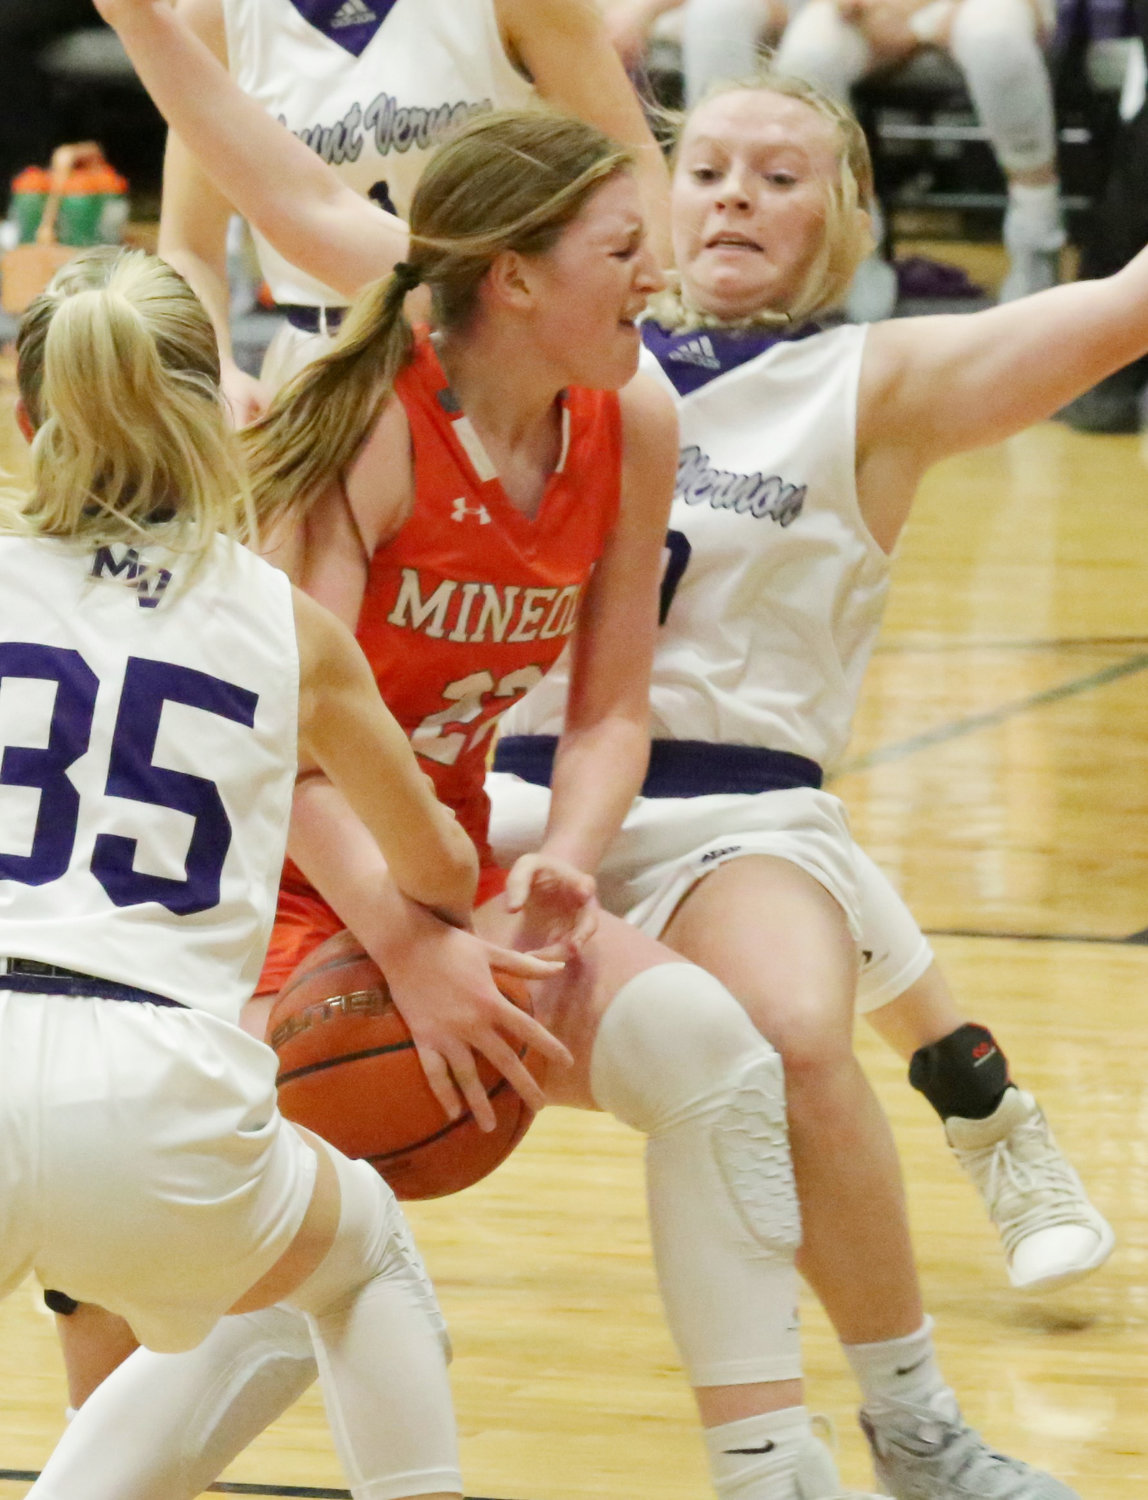 This accurately depicts the physicality of the play between Mineola and Mt. Vernon last Friday. Here, Macy Fischer forces her way through a crowd.